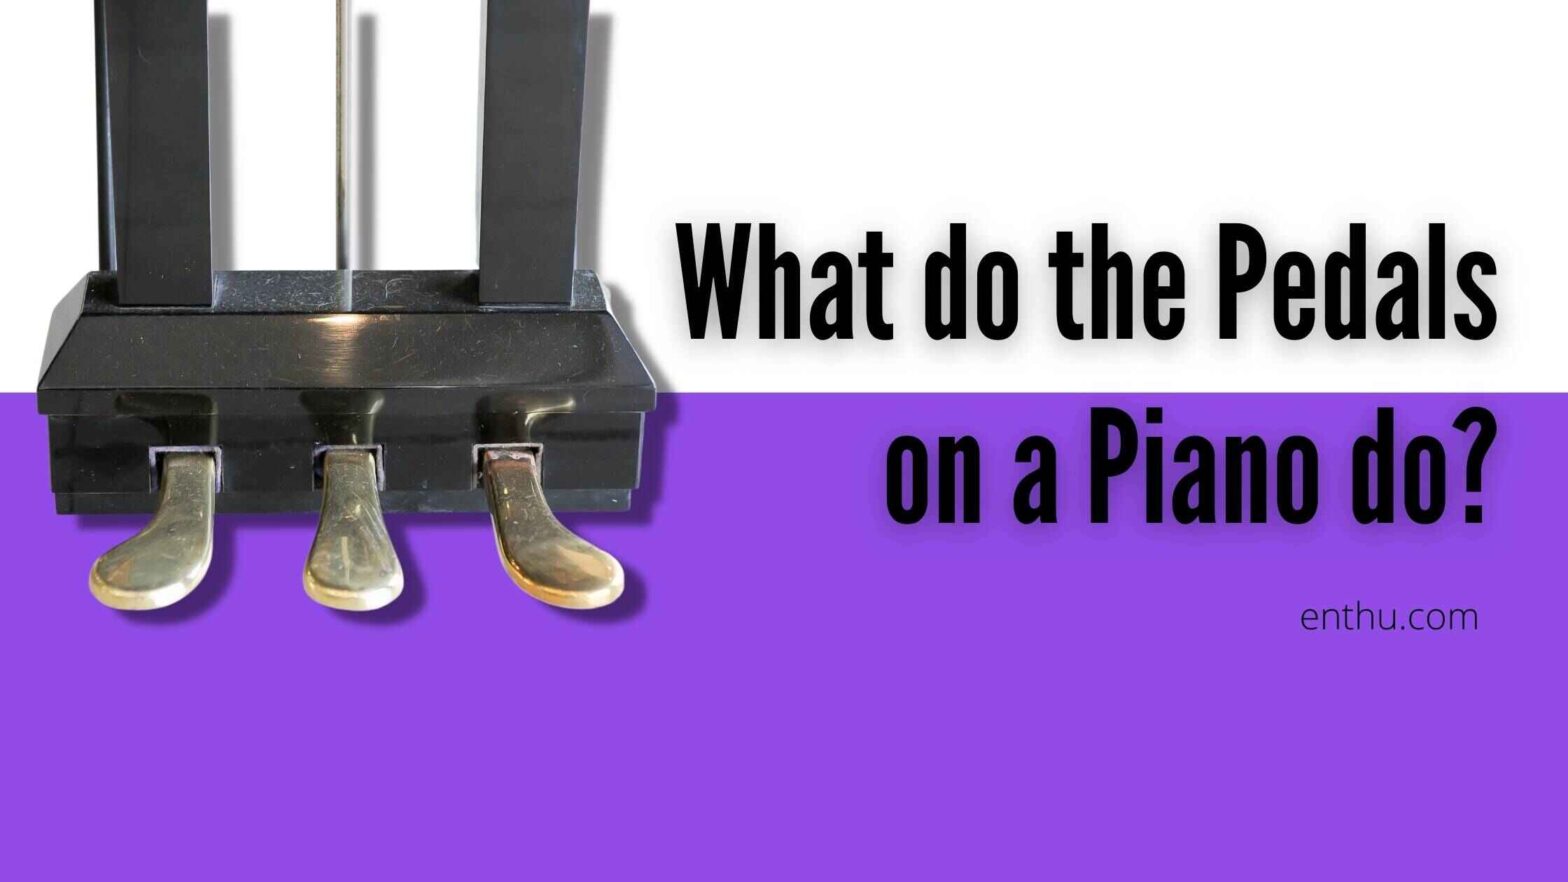 what do the pedals on a piano do